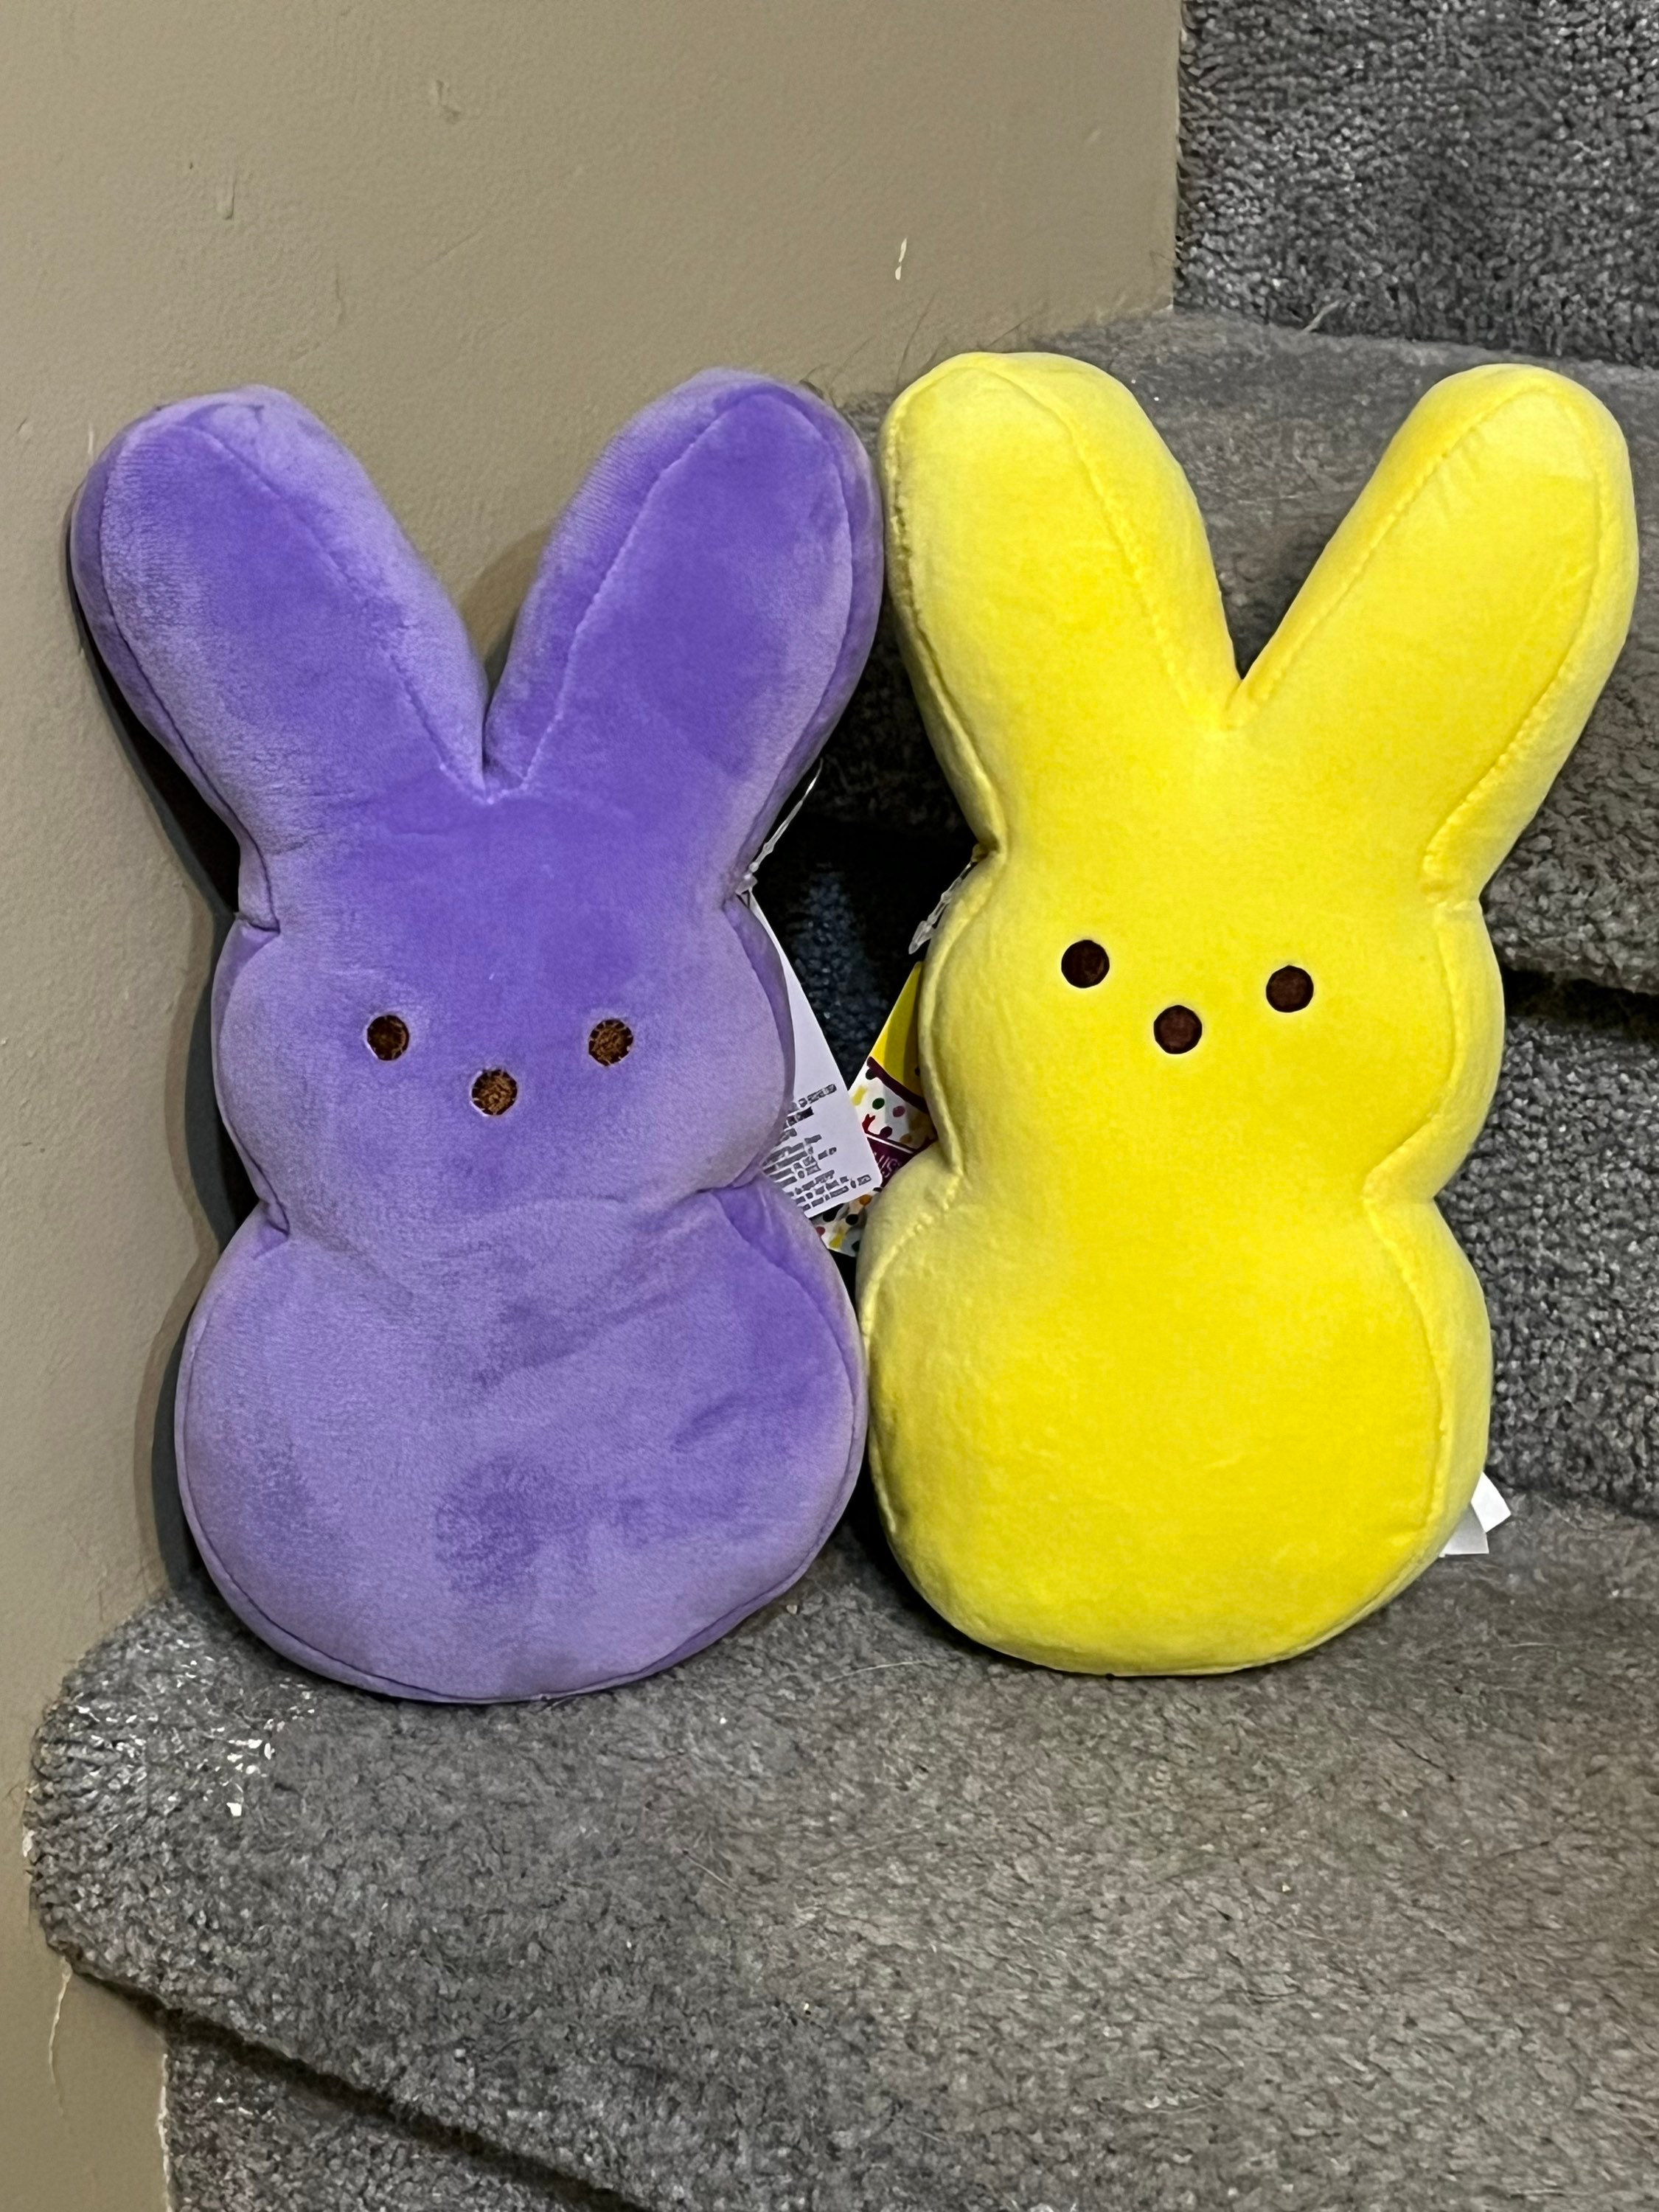  Peeps for Pets 4 Pattern Plush Bunny Squeaker Toy in Assorted  Colors, Small Peeps Bunny Plush for Dog Easter Baskets with Squeaker in